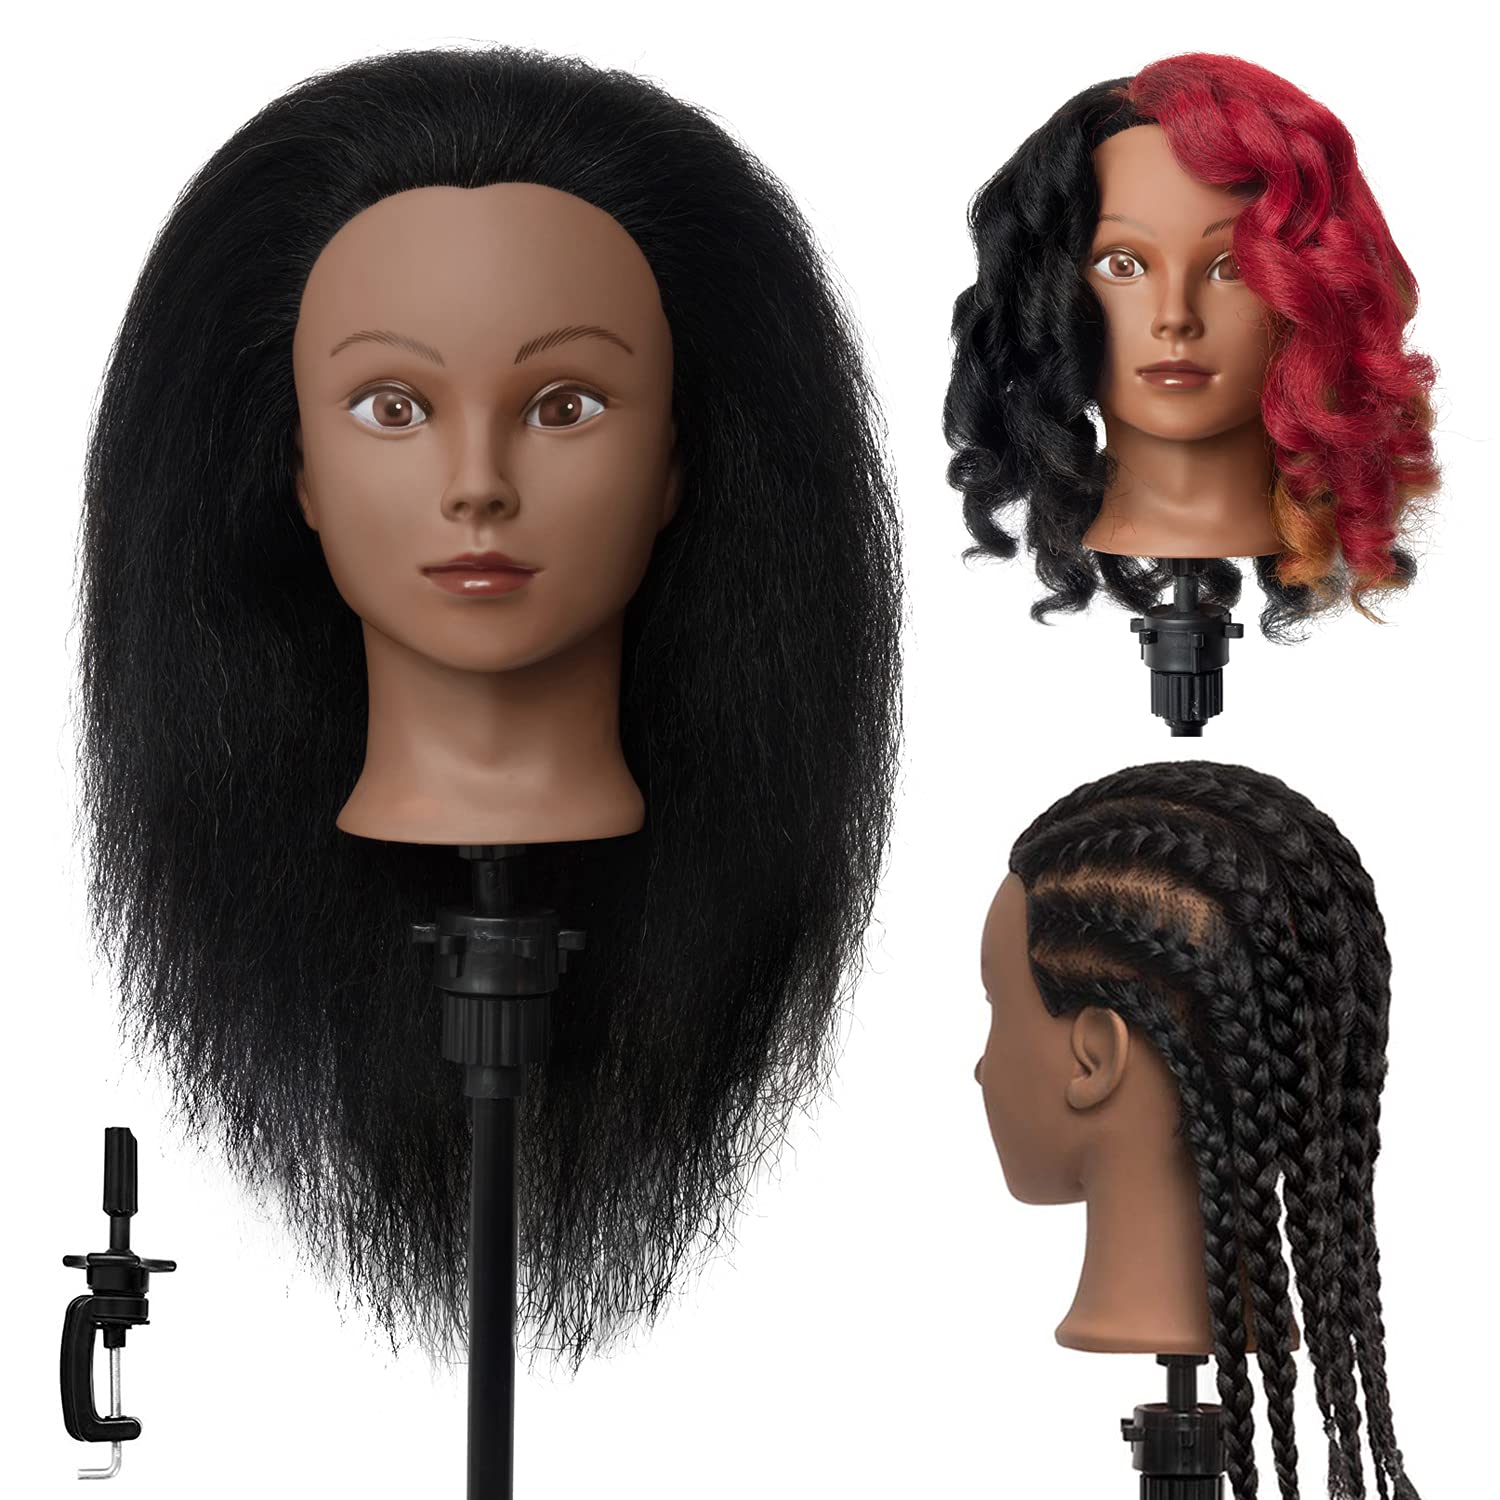 100% Real Hair Mannequin Head Hairdresser Training Head With